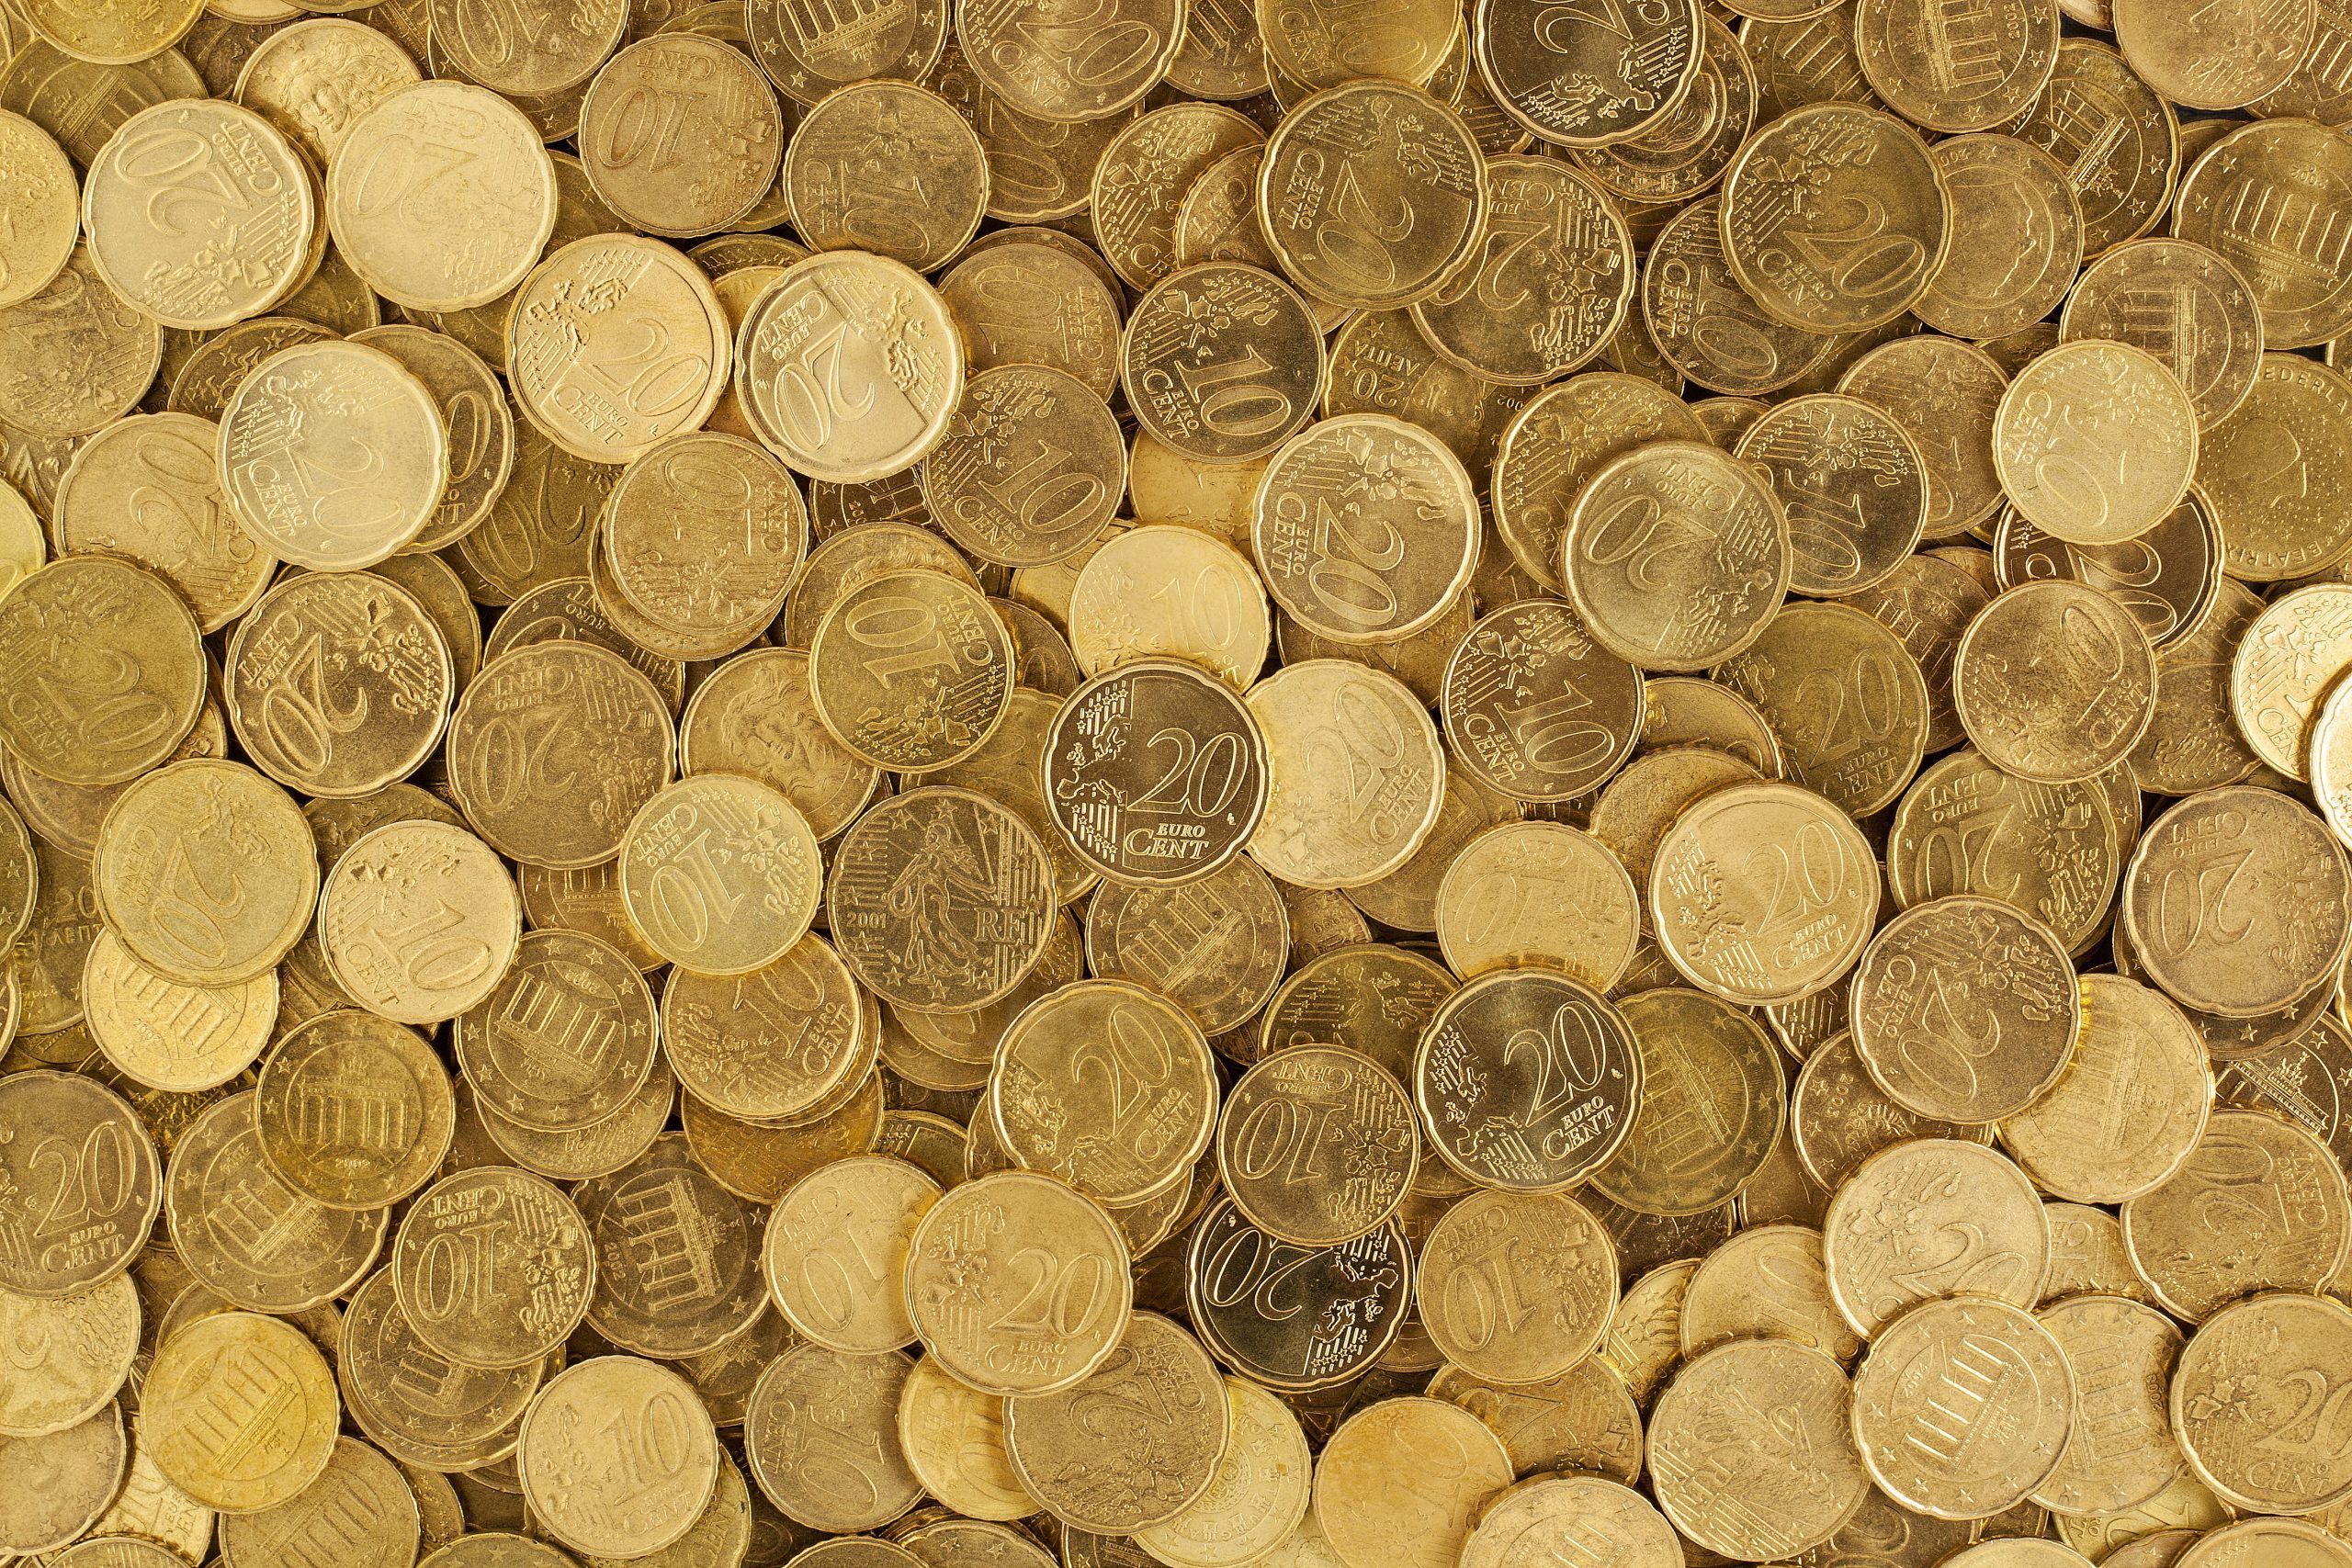 euro-coins-currency-money-106152-9908745